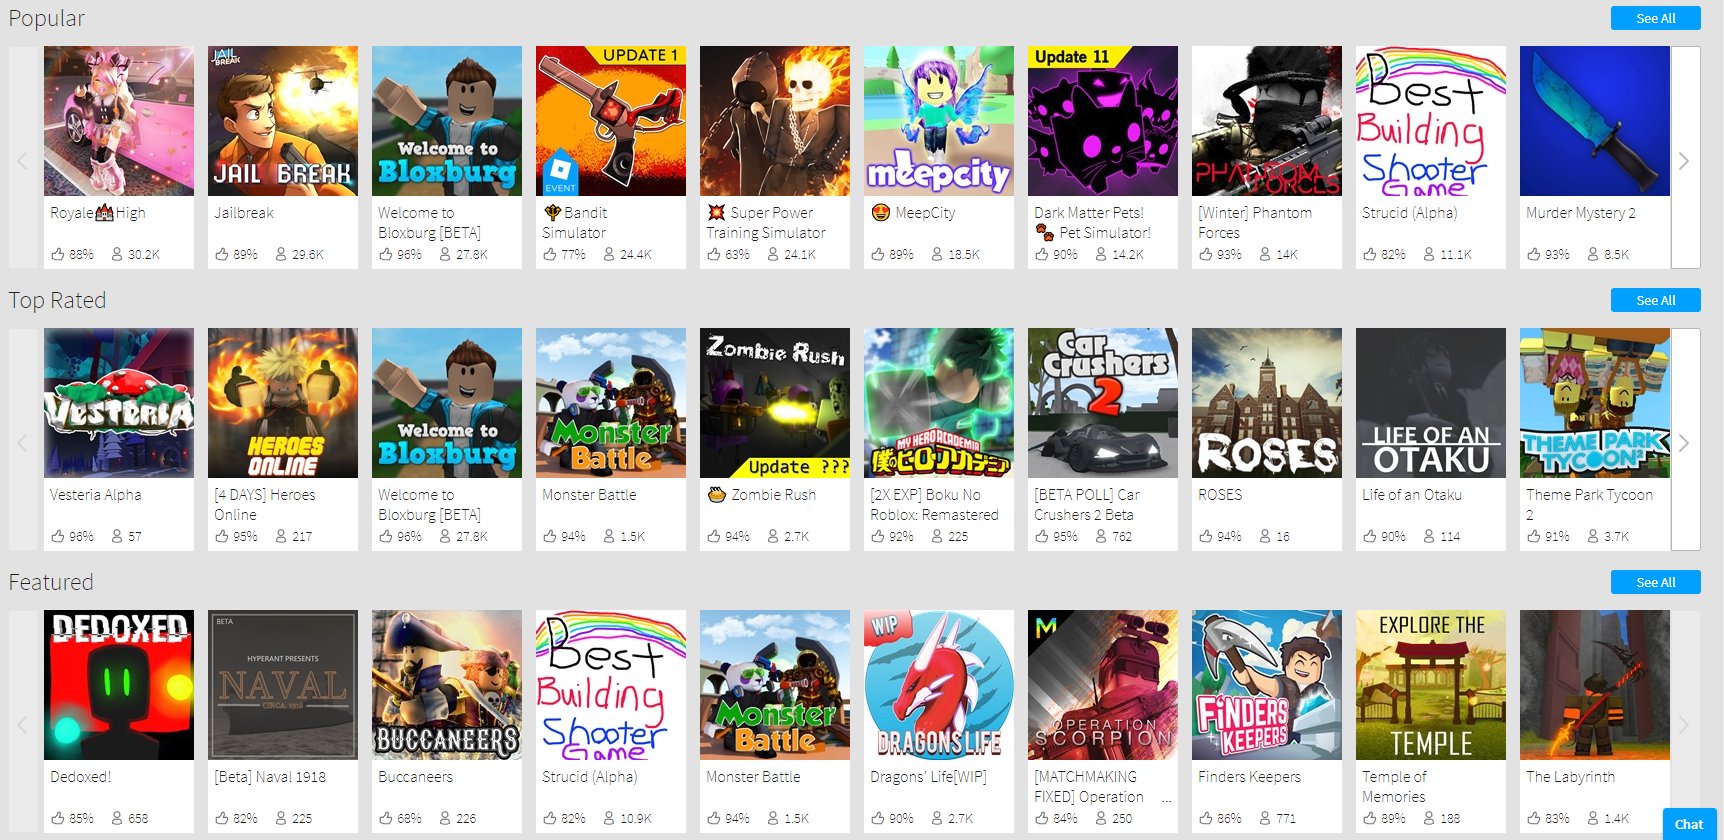 Bloxy News On Twitter Bloxynews Roblox Has Moved The Top Earning Sort Of The Games Page From The Second Row To The Bottom Row Https T Co Kwm0qi2ut9 Https T Co Xmstvdyvjg - roblox leaked site 226